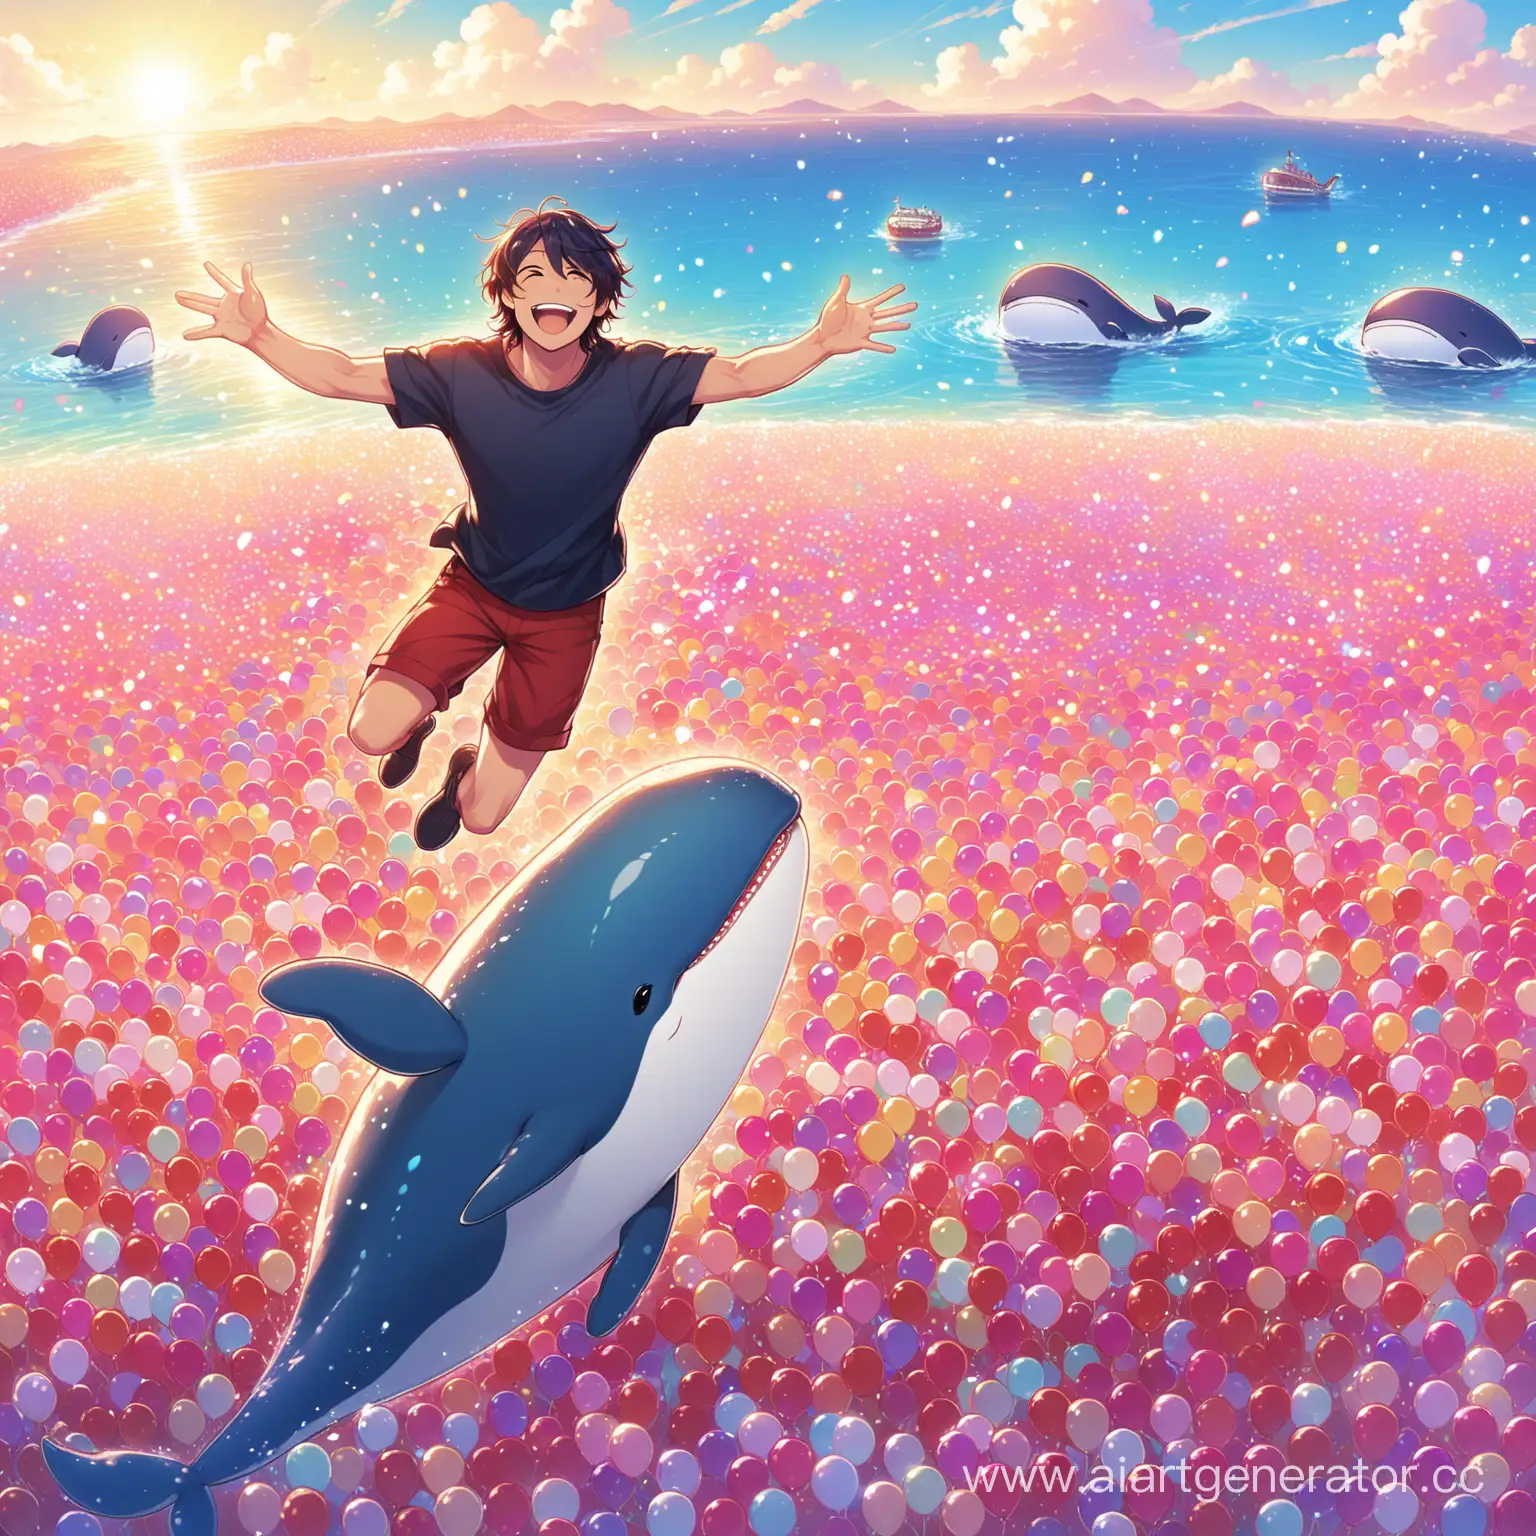 Keith who is beloved, a guy-whale who is totally happy and beloved by thousands people
